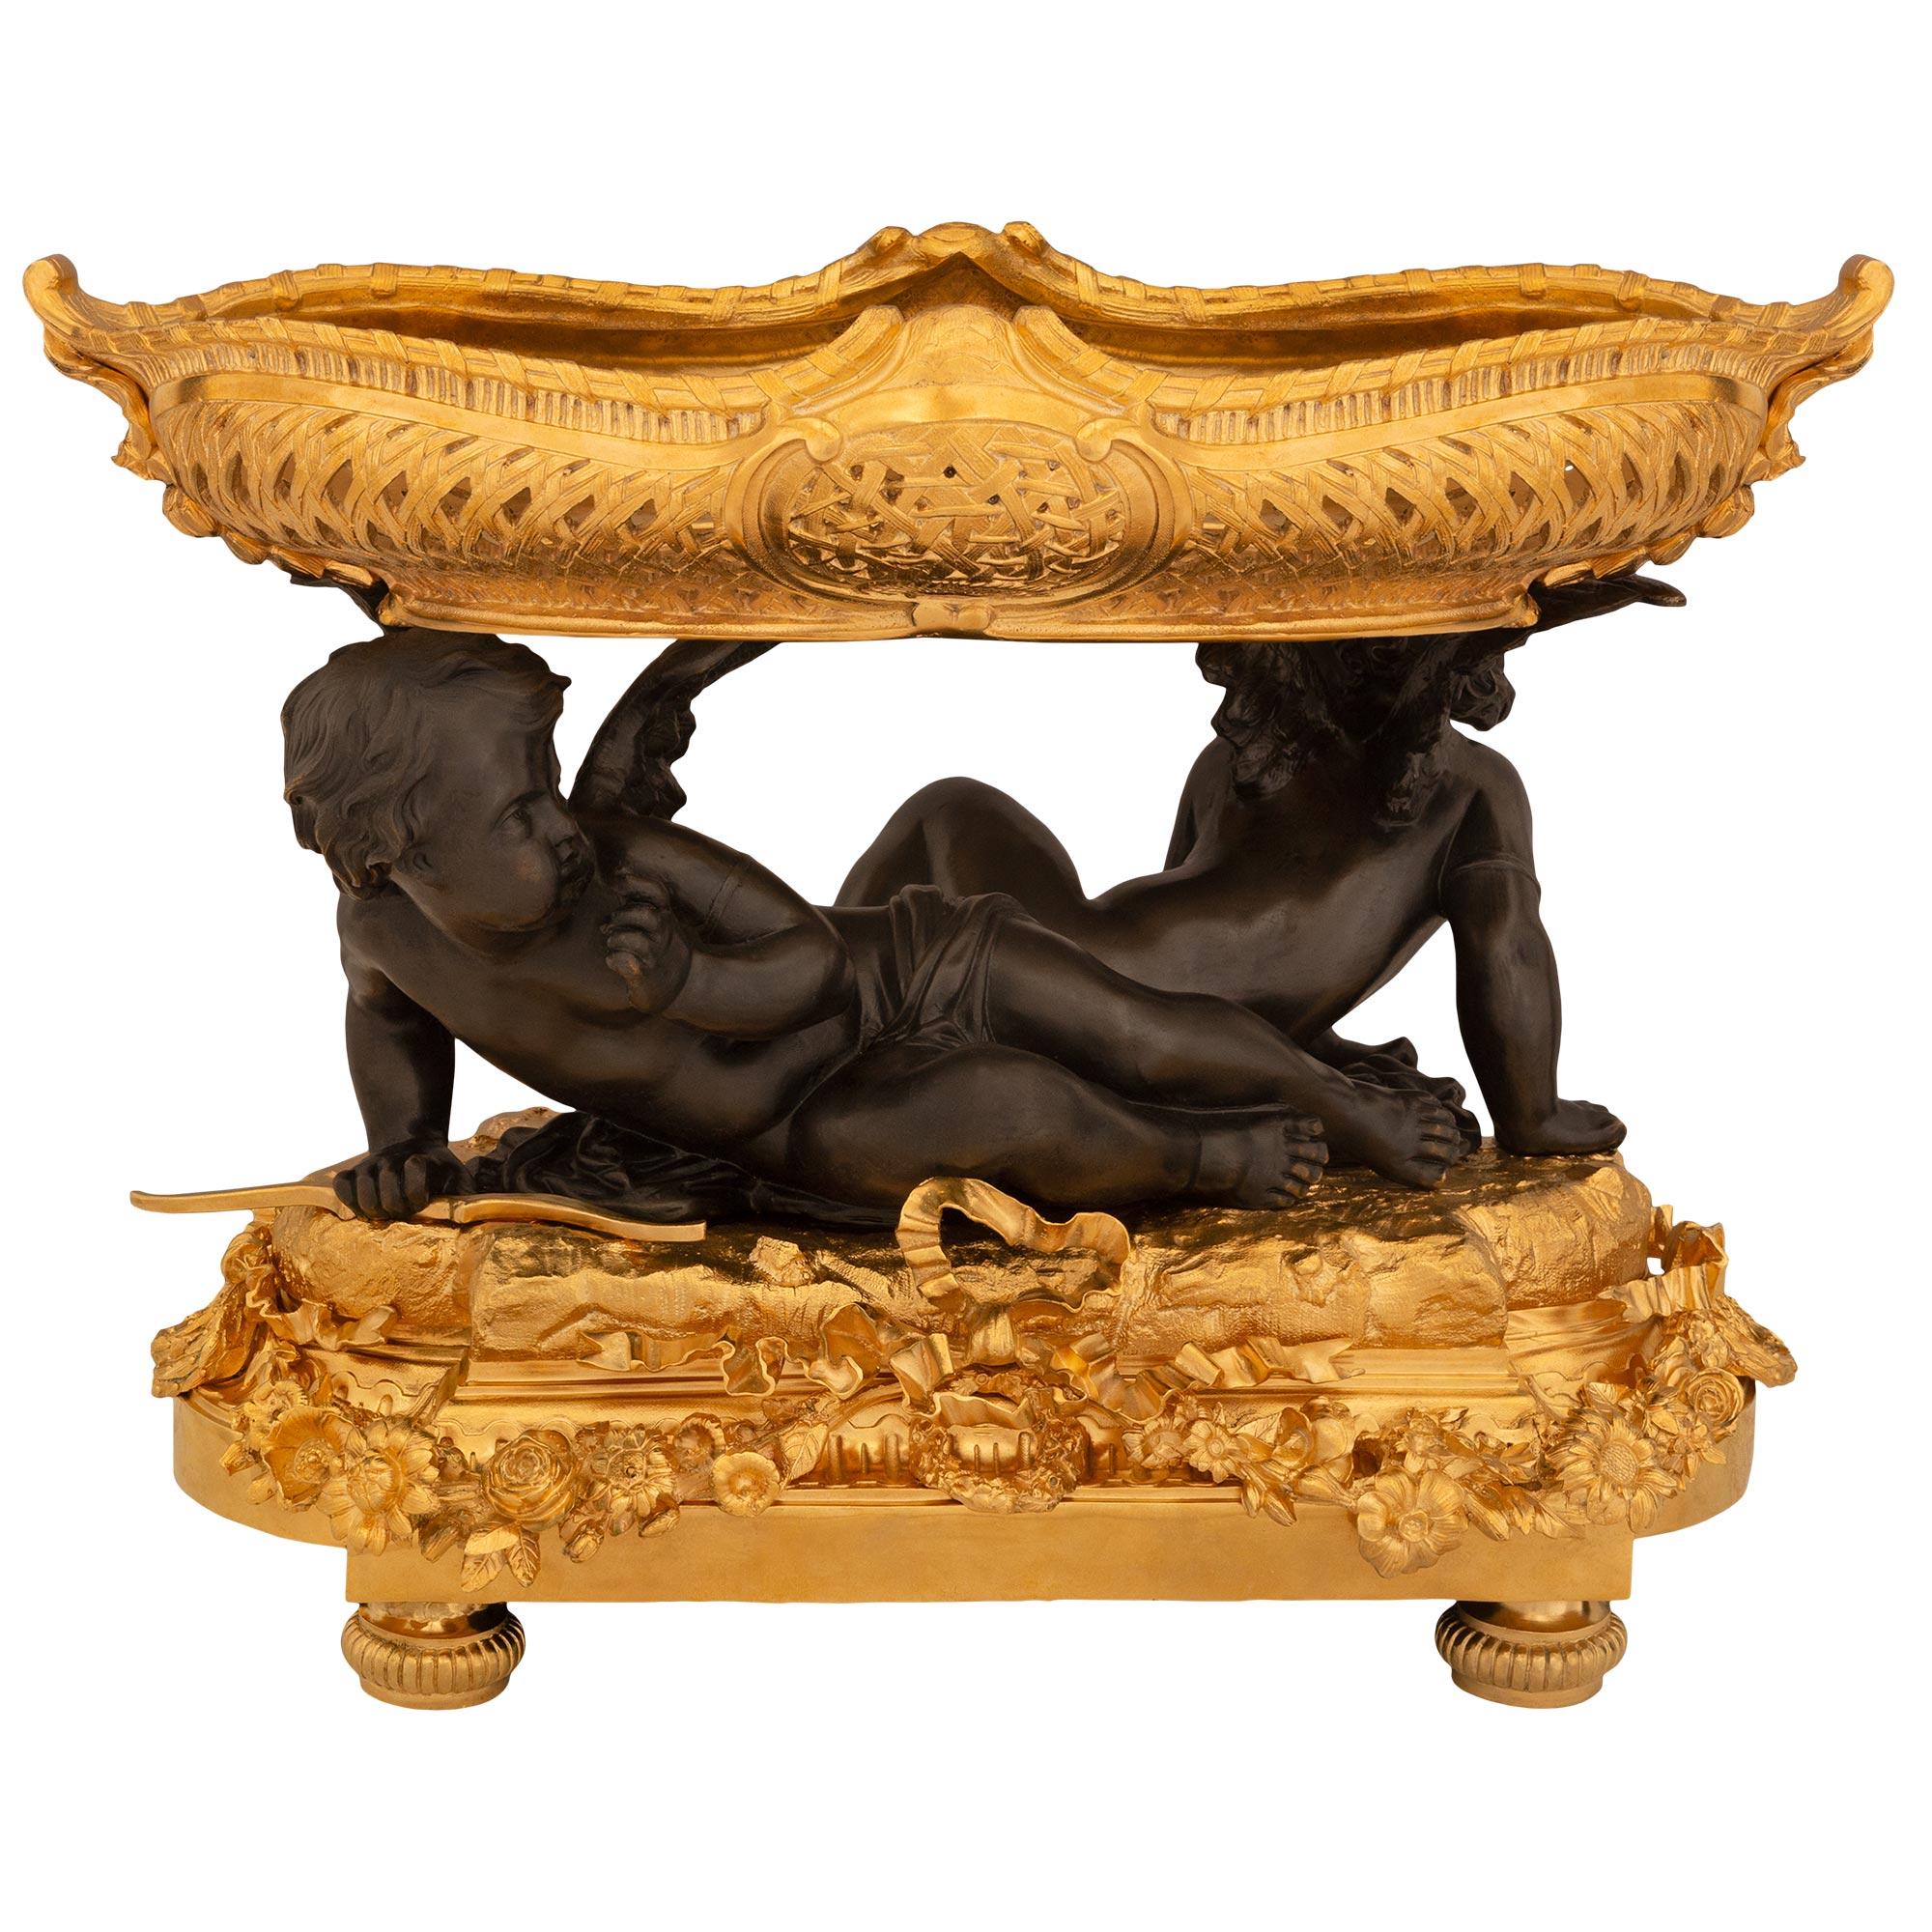 A sensational and large scaled French mid 19th century Louis XVI st. Ormolu and patinated Bronze centerpiece. The centerpiece is raised by topie shaped feet below a richly decorated base. The base has a central bow with a swaging floral garland.